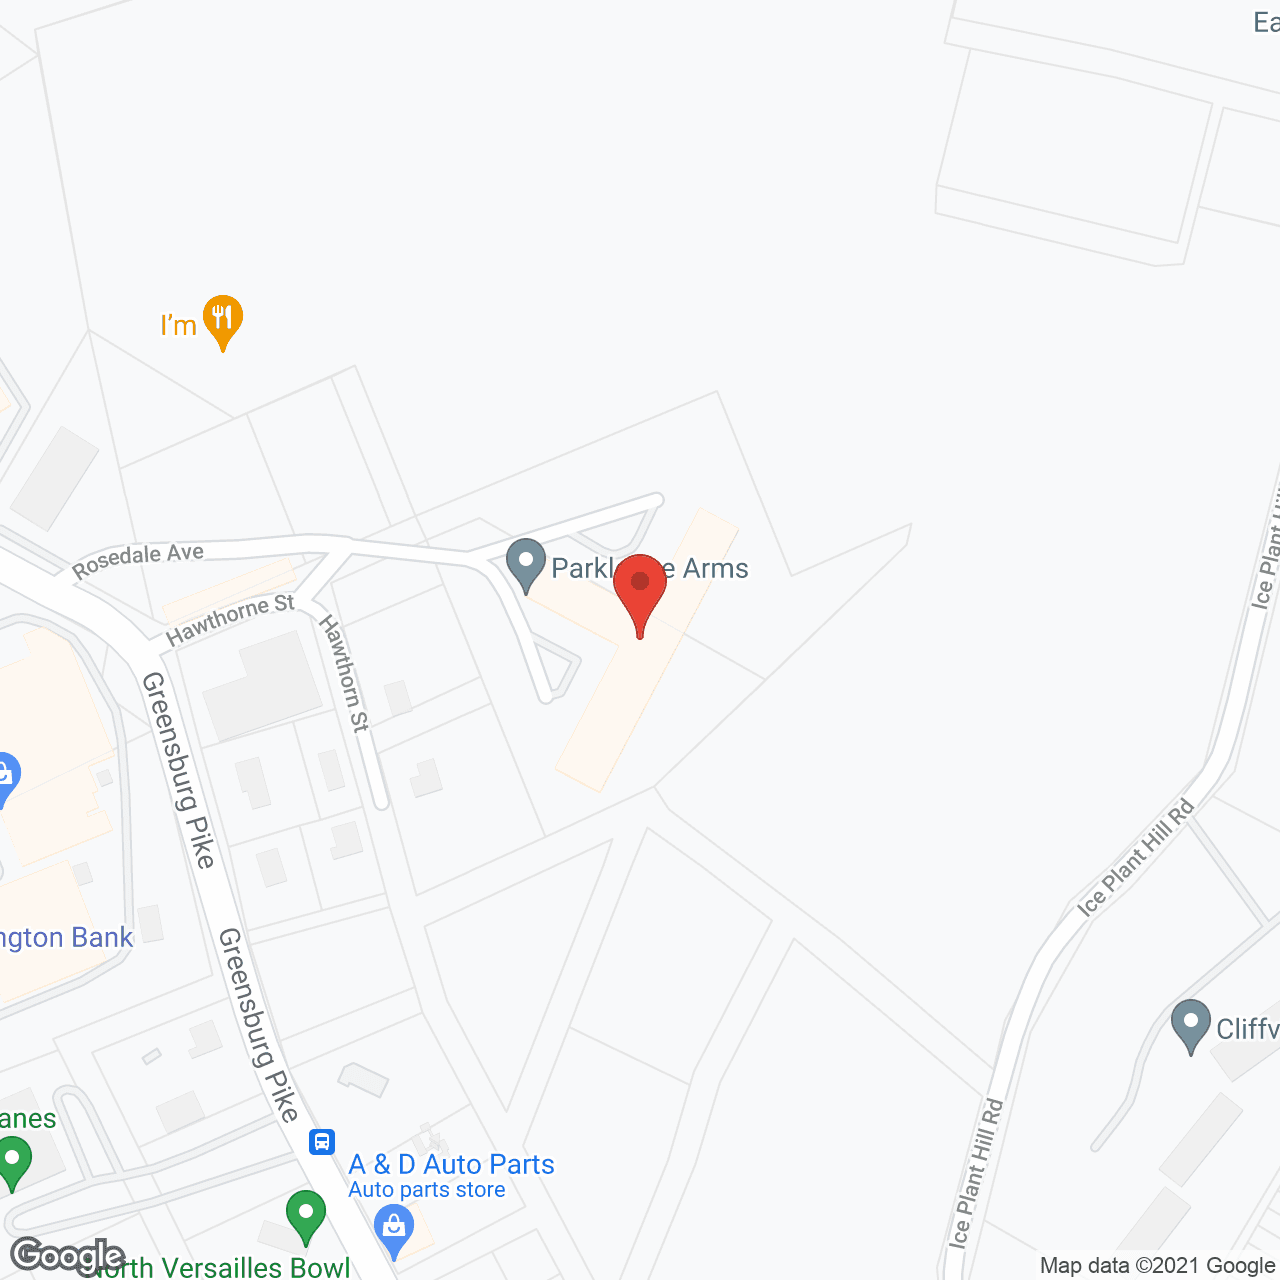 Parkledge Arms in google map